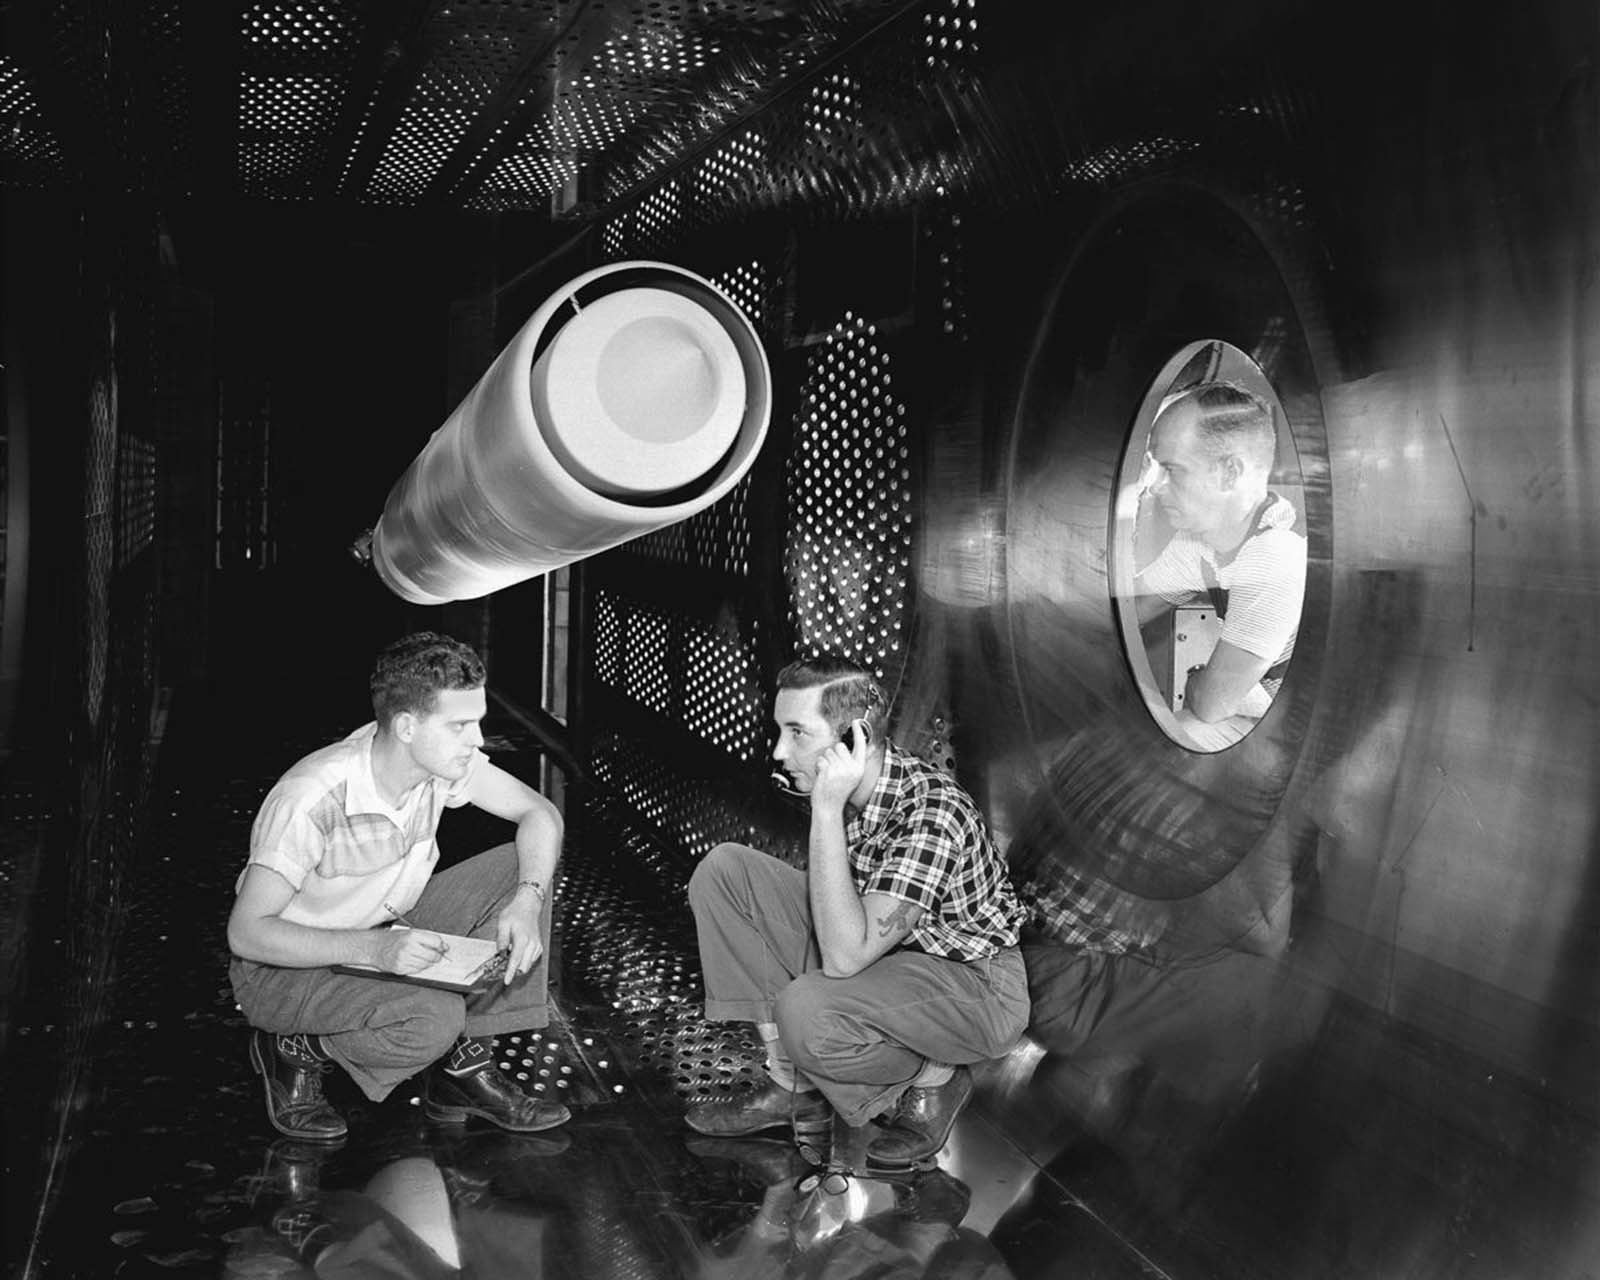 An ACN Nozzle model in the 8 x 6-foot Supersonic Wind Tunnel Test-Section, 1957.